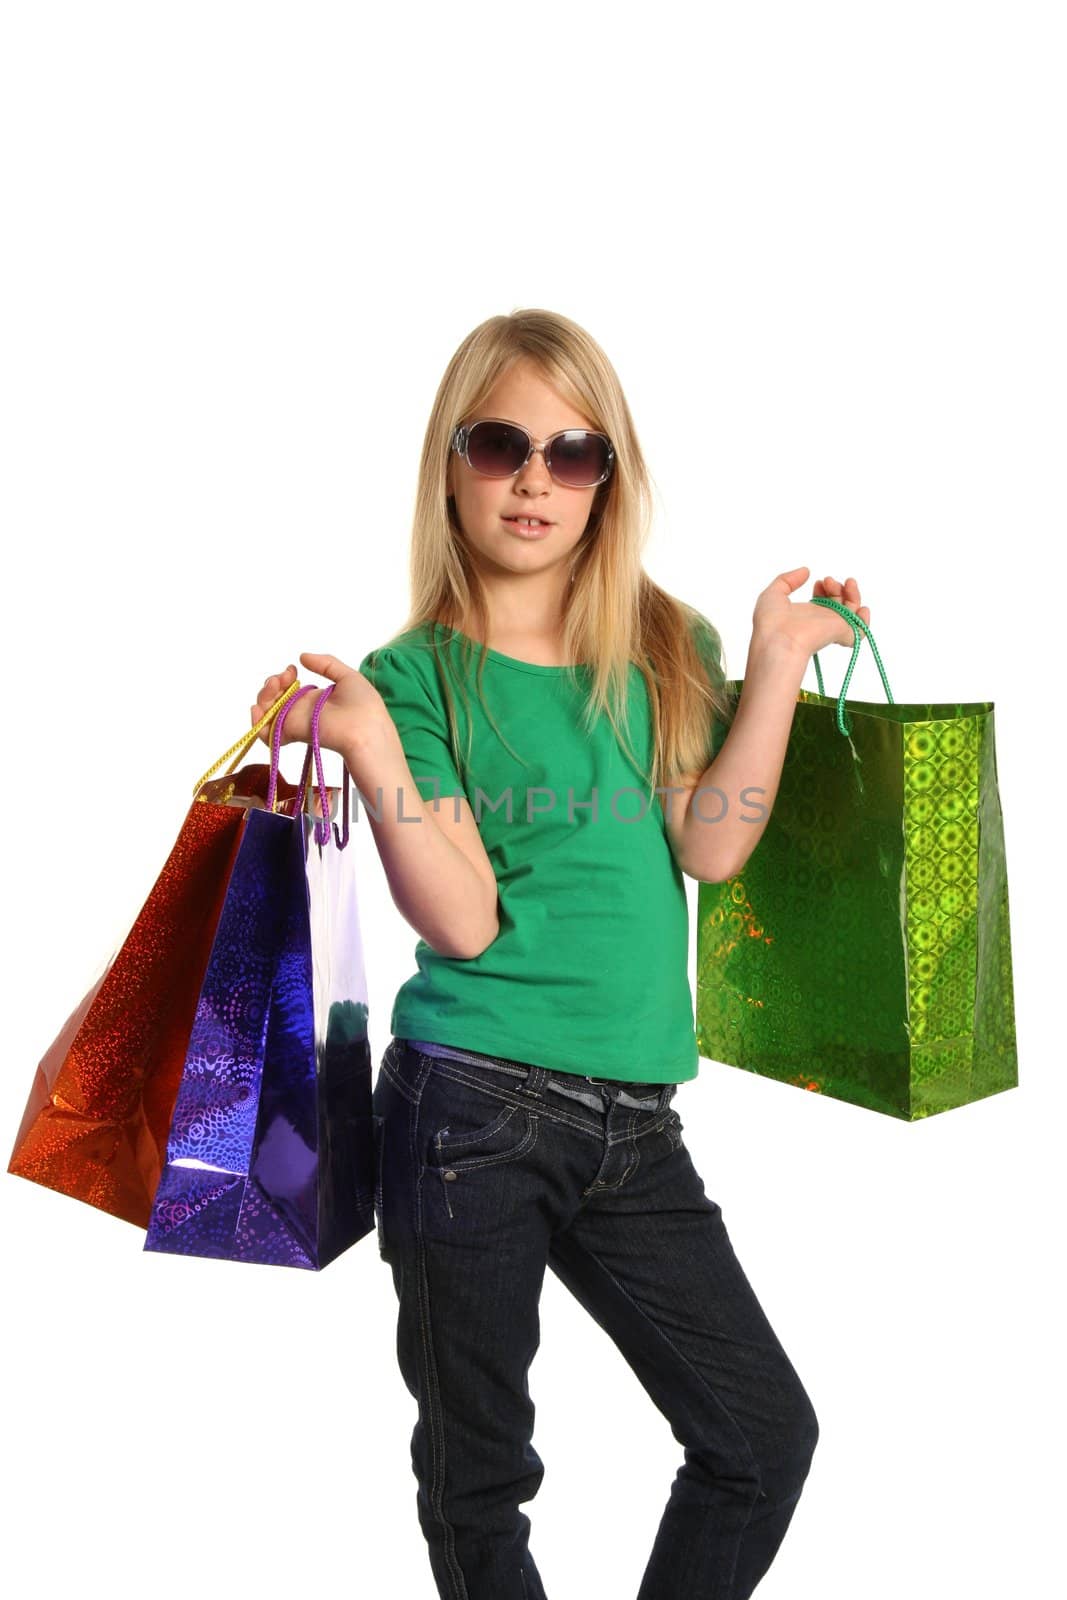 Trendy young shopping girl with bags and sunglasses